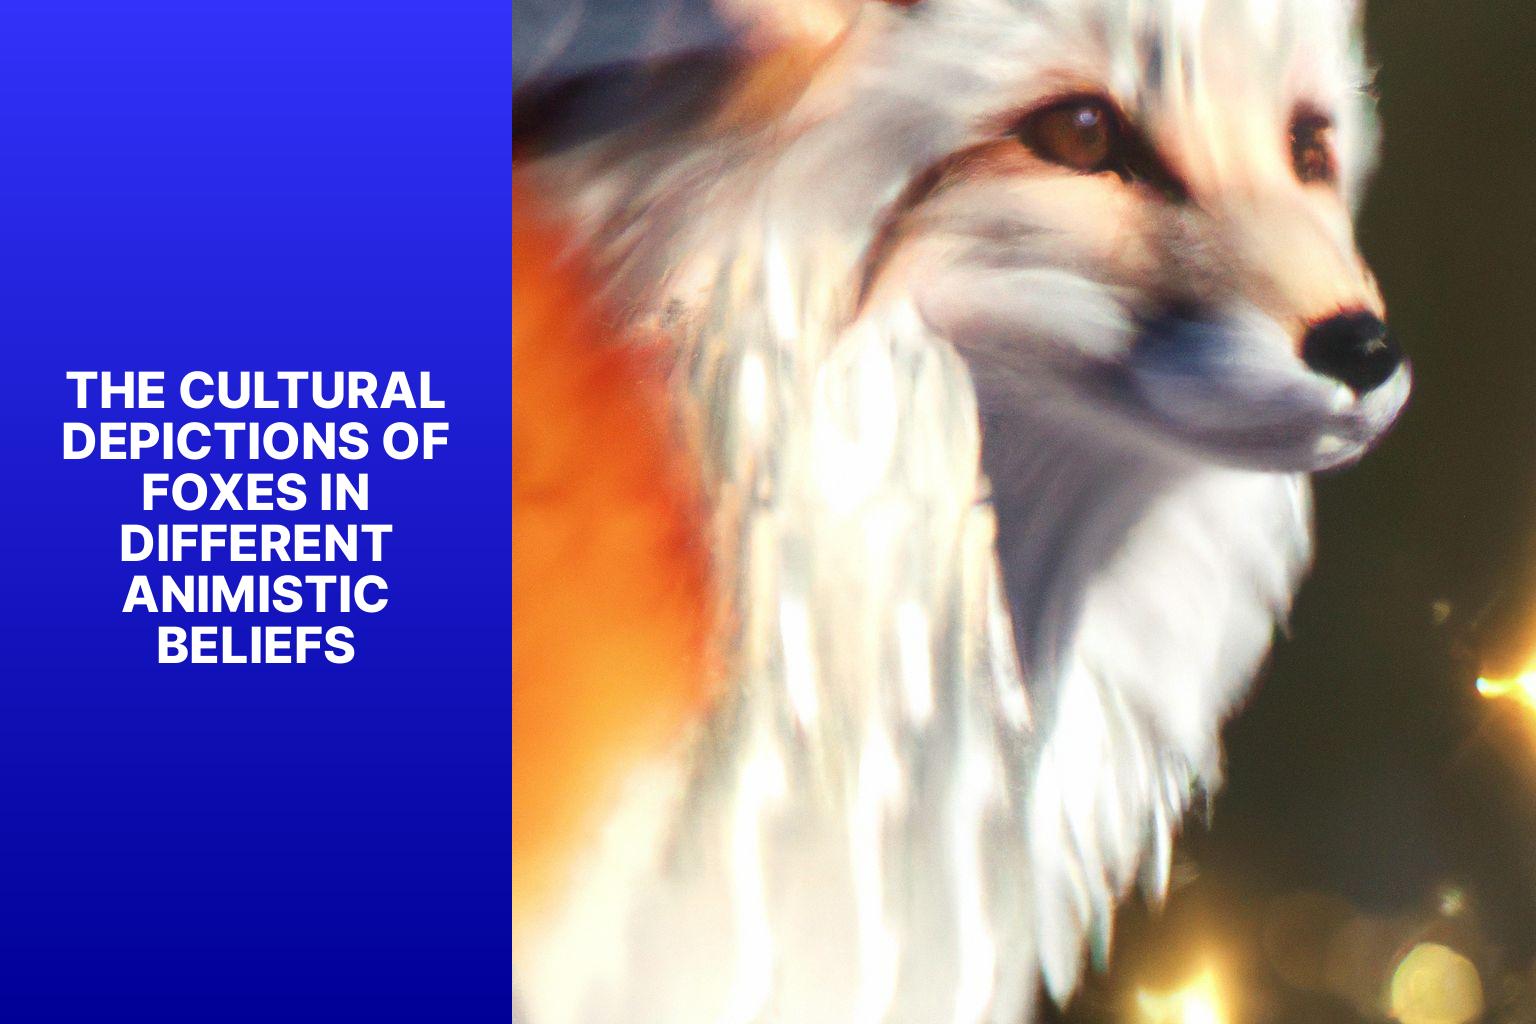 The Cultural Depictions of Foxes in Different Animistic Beliefs - Fox Myths in Animism 